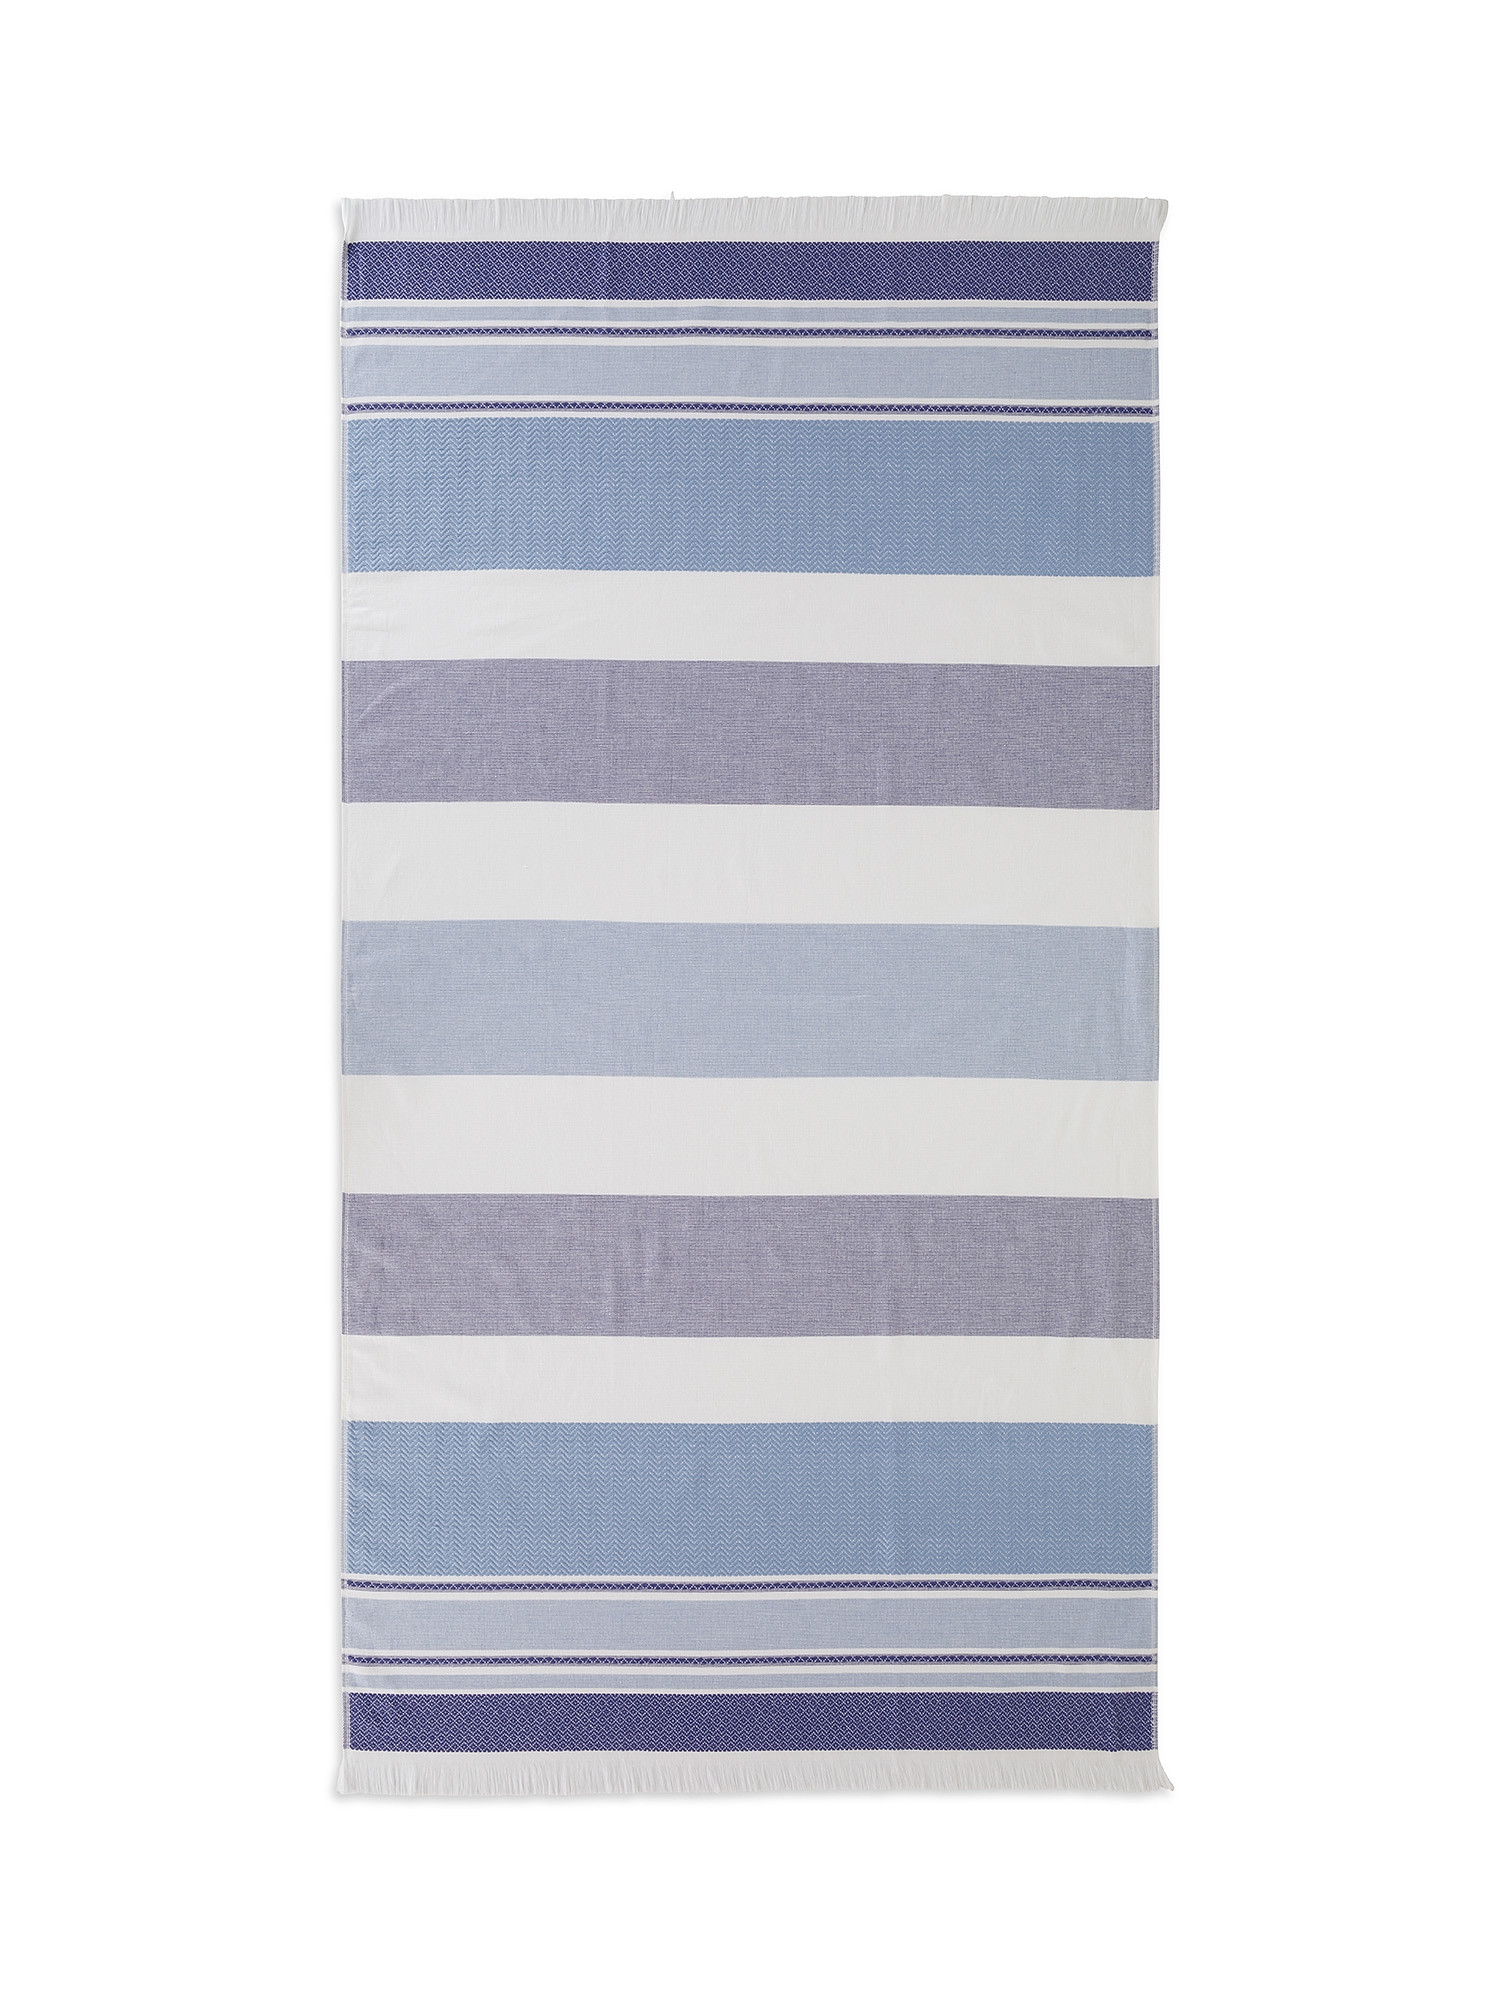 Telo mare hammam cotone jacquard a righe, Blu, large image number 0